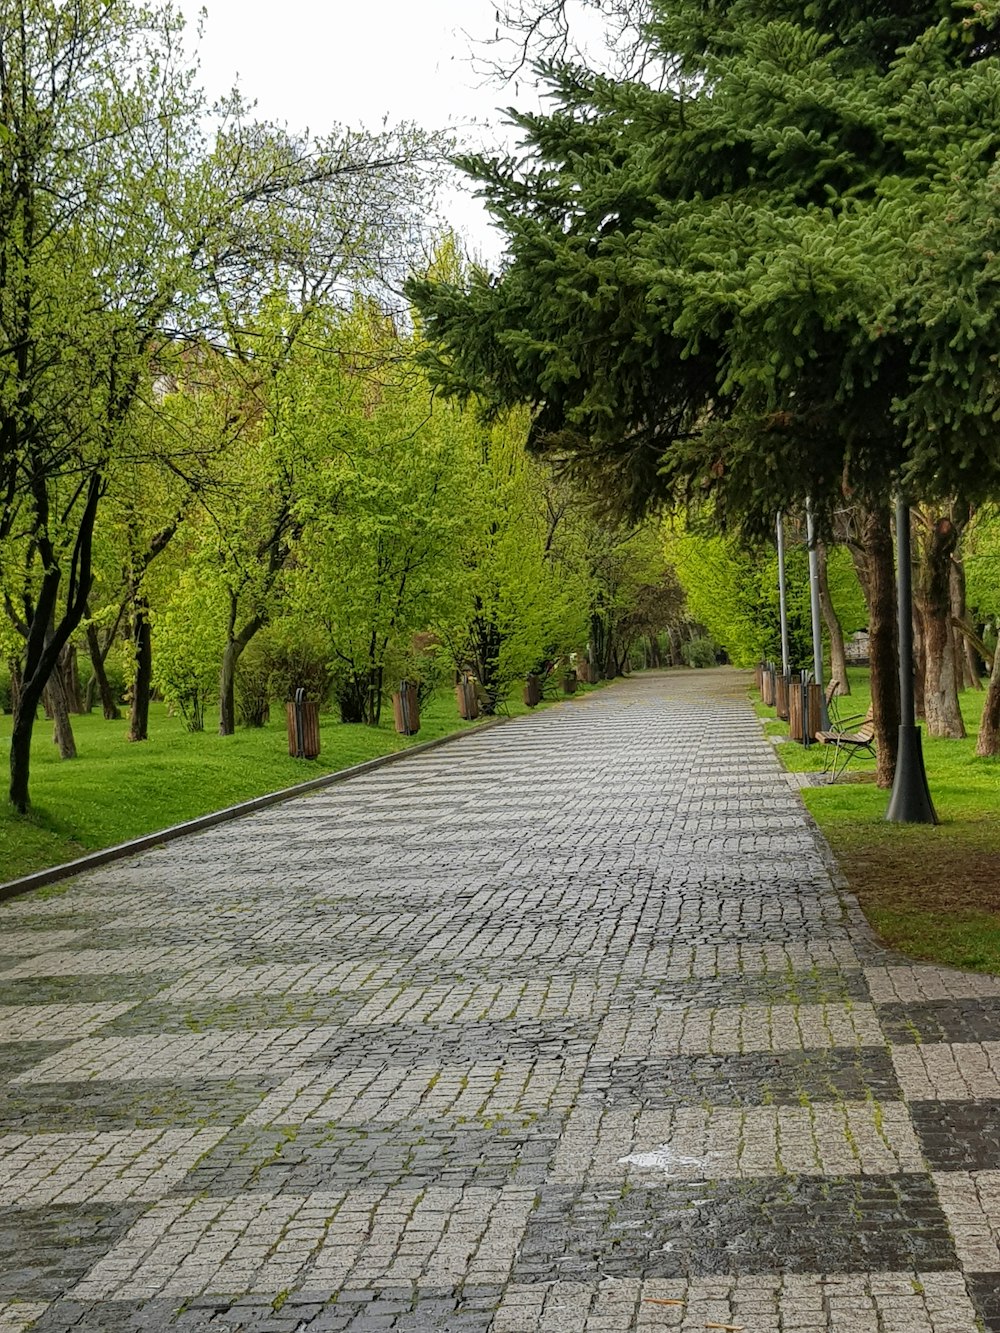 a brick road lined with trees